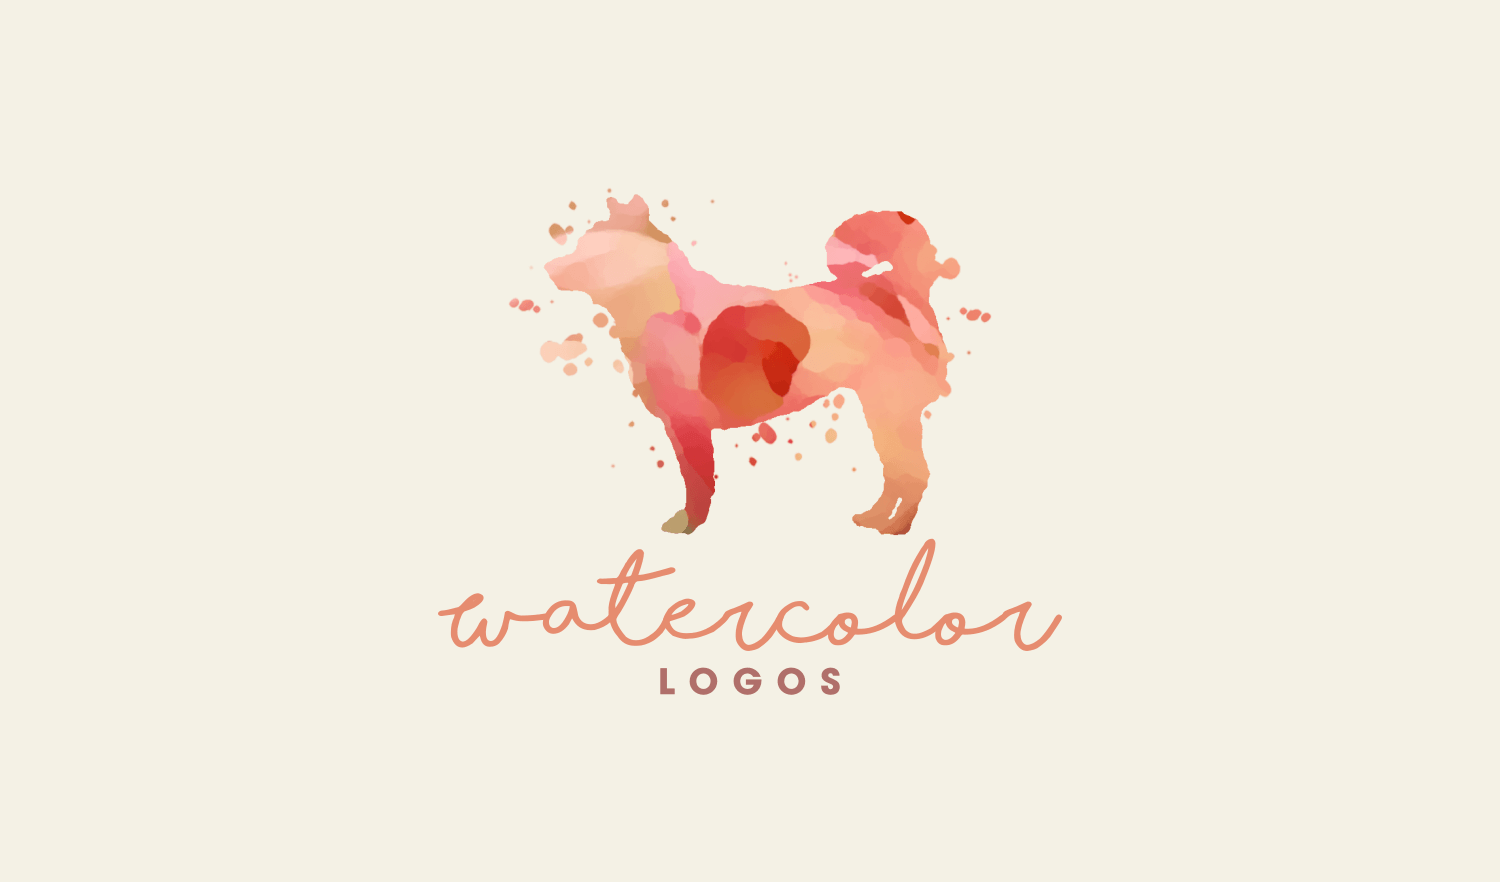 Watercolor Logo - How To Create Watercolor Logos with GIMP | Logos By Nick